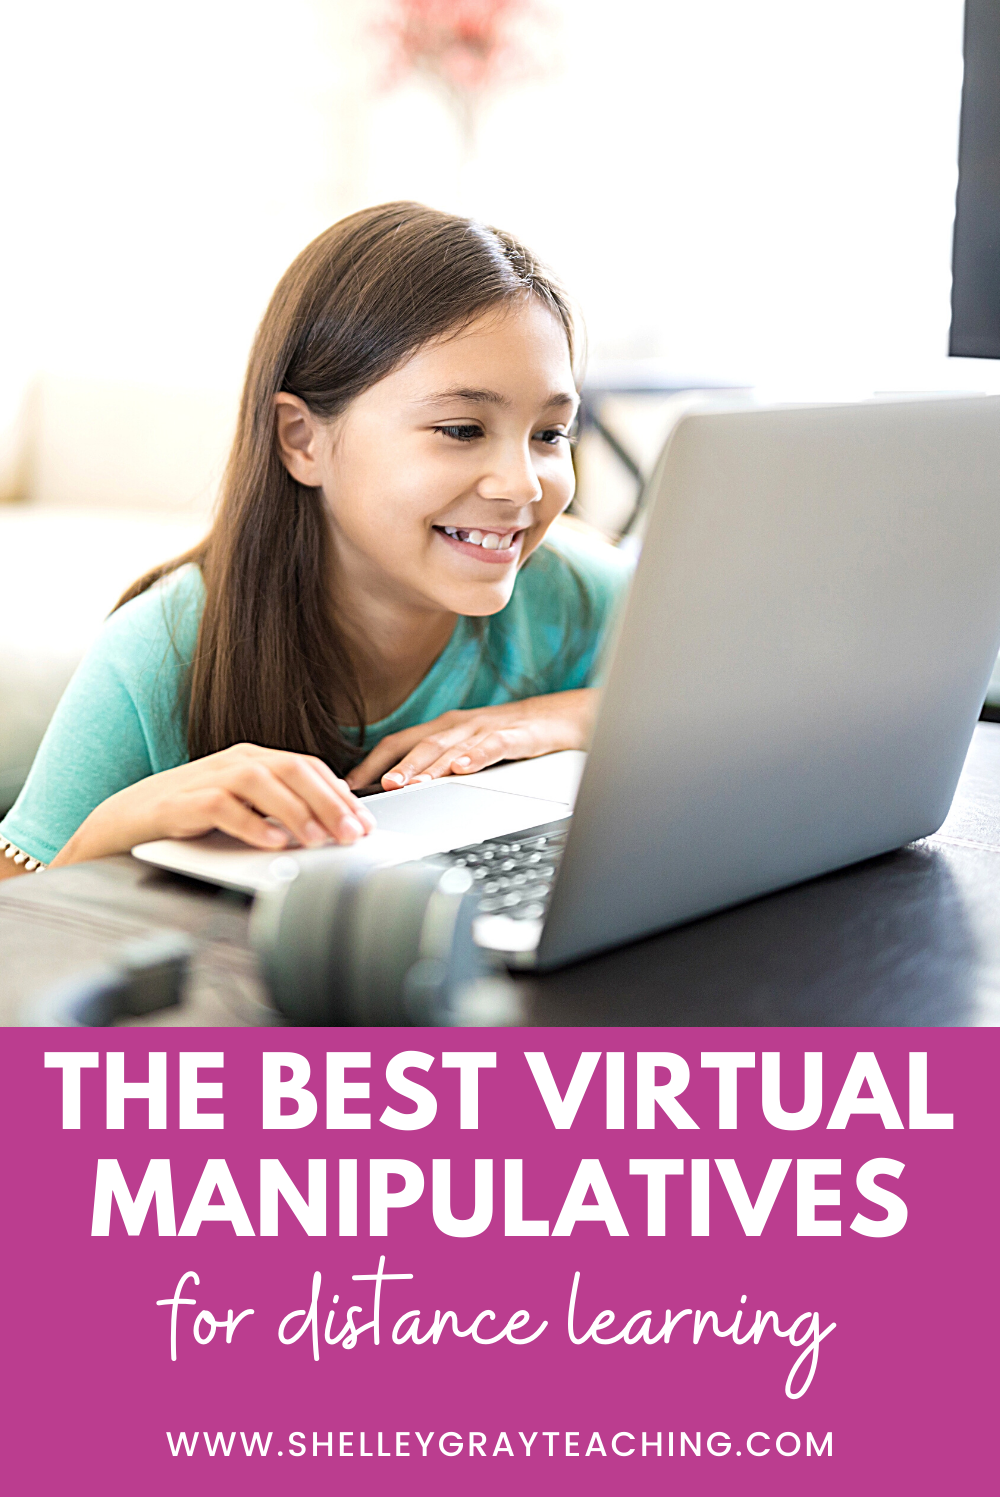 The Best Virtual Manipulatives for Distance Learning